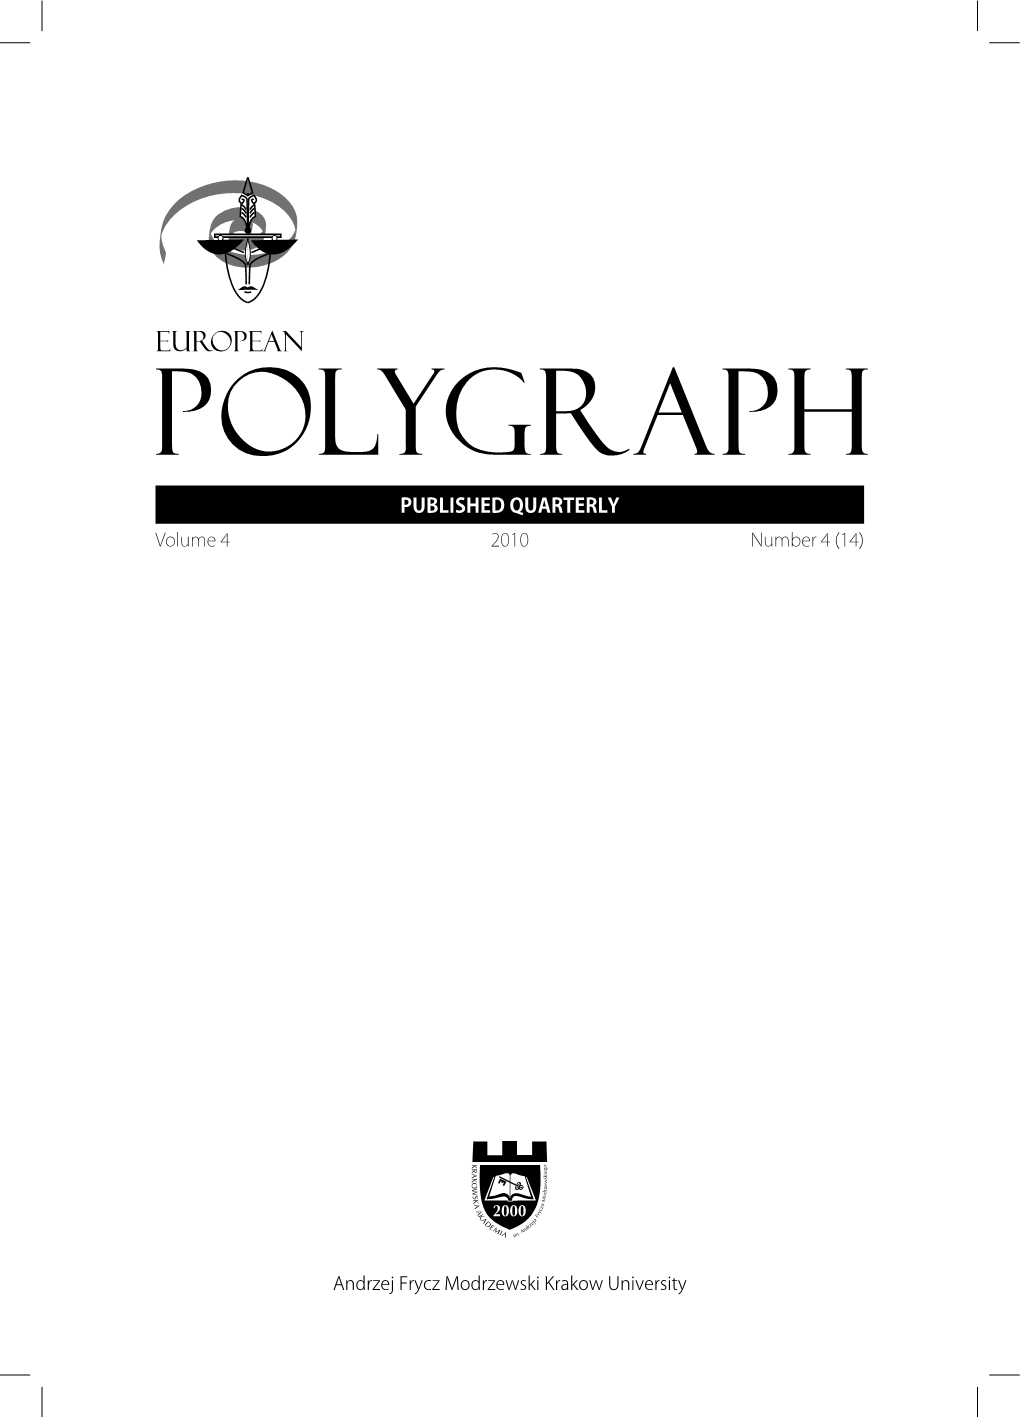 Field and Laboratory Polygraph Examinations